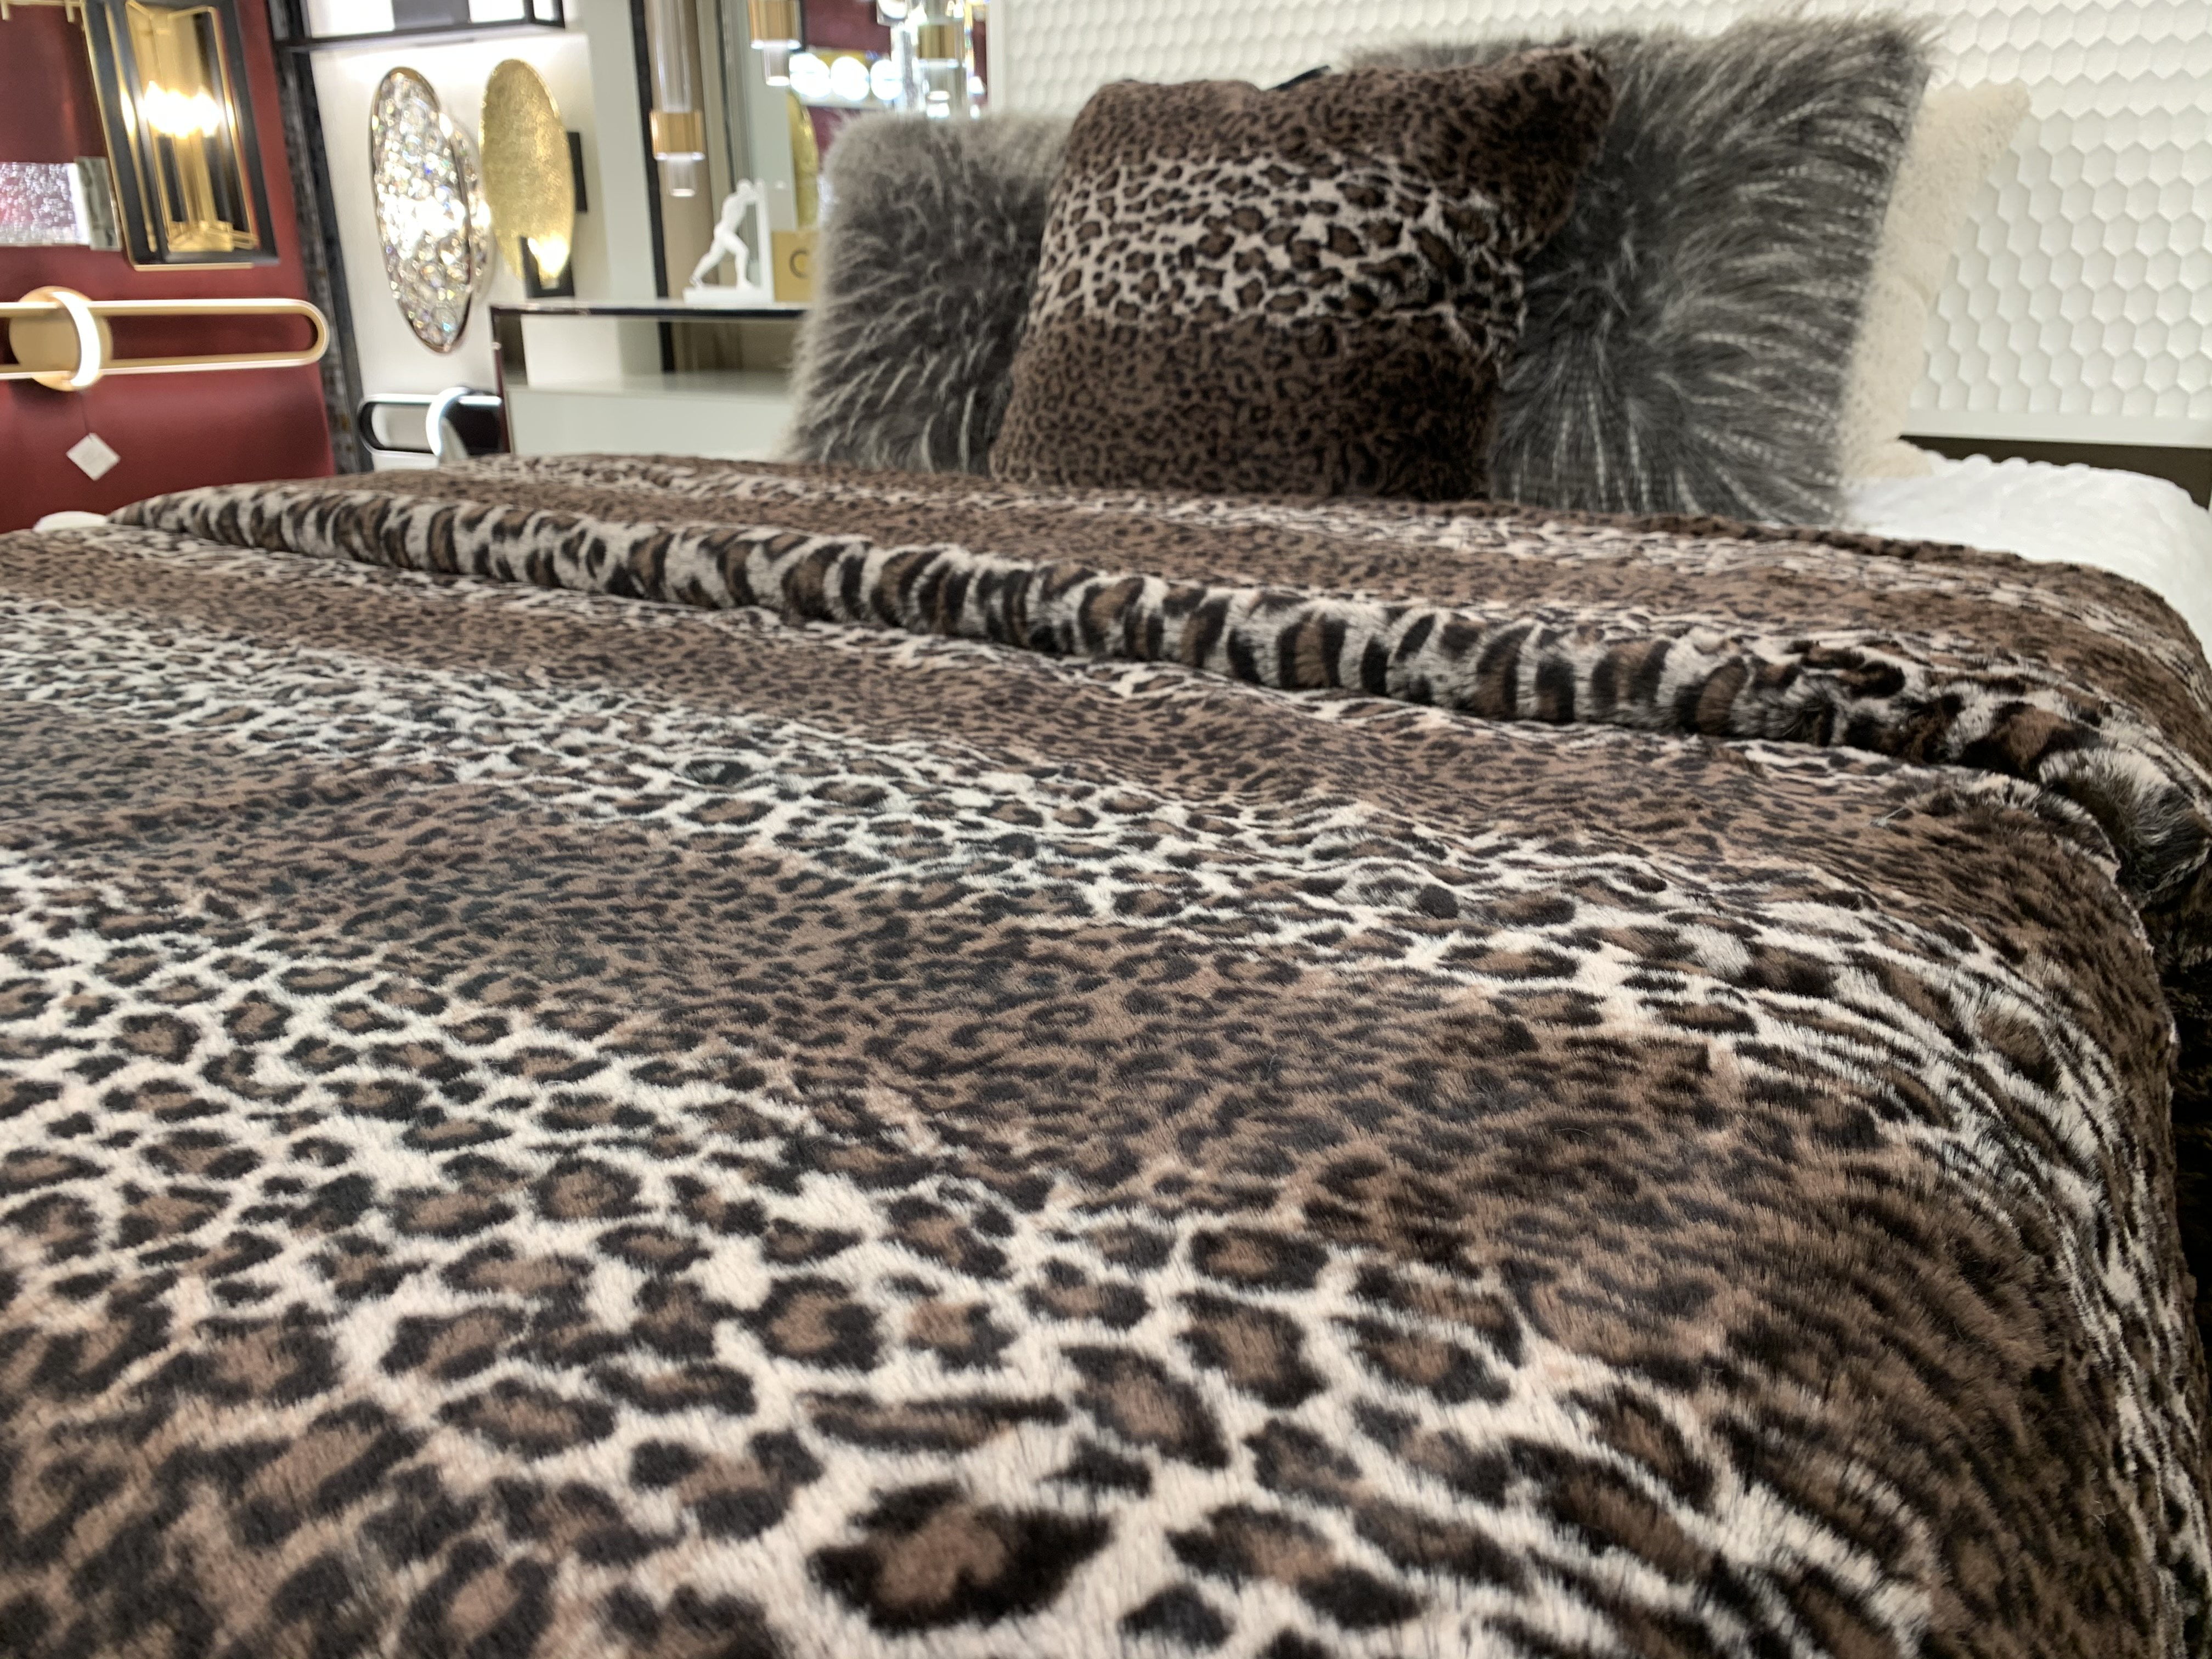 LEOPARD ANIMAL PRINT LIGHT BLANKET VERY SOFTY AND WARM KING SIZE 